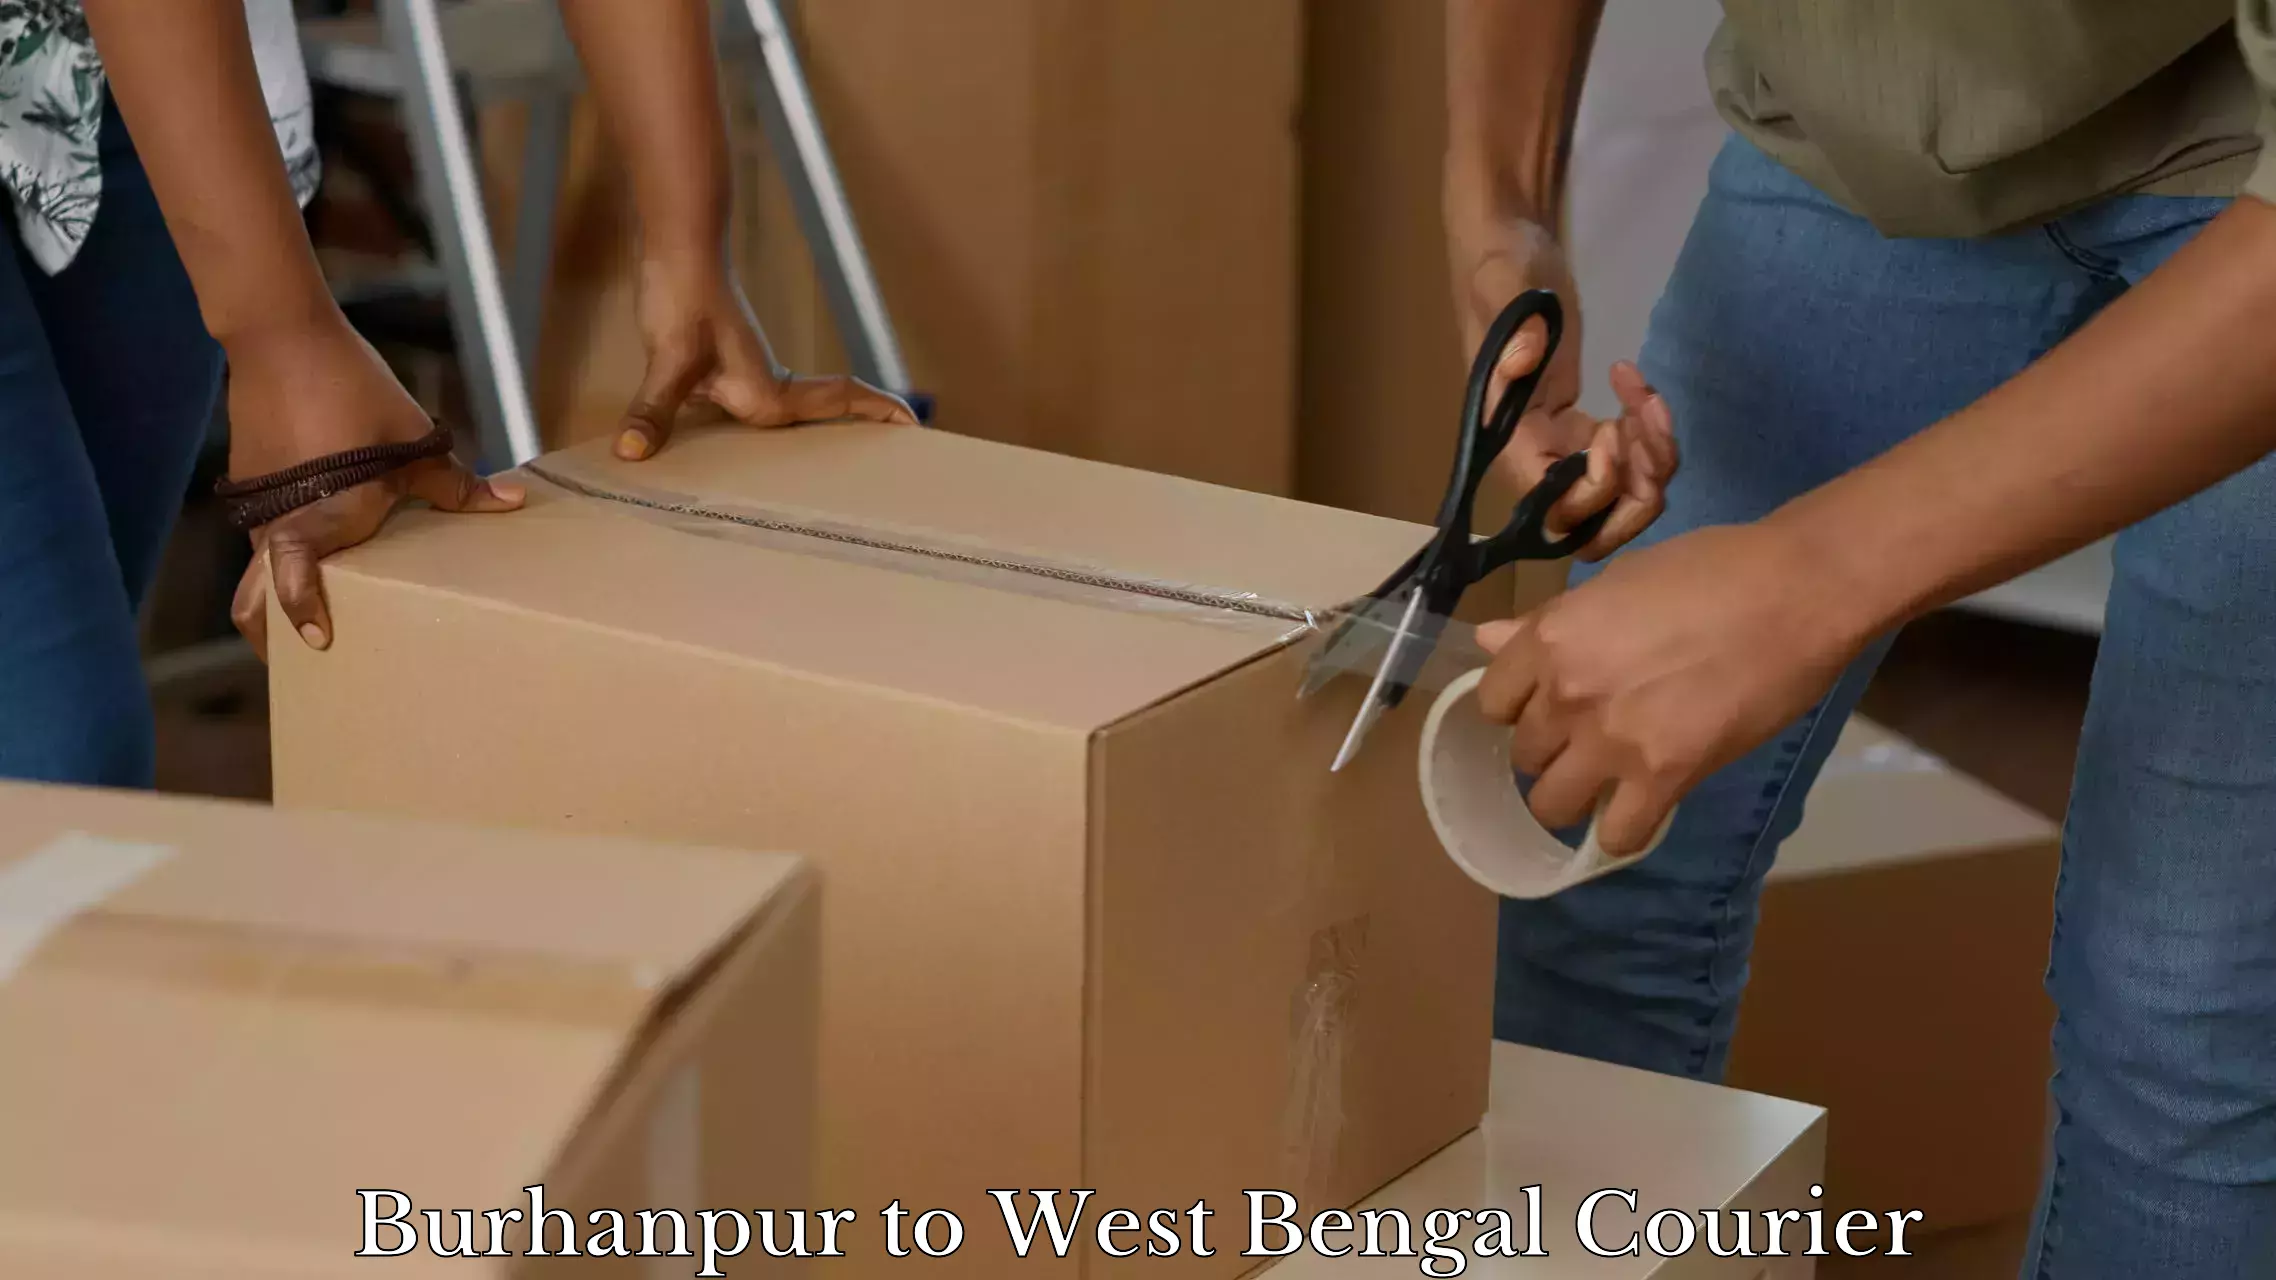 Luggage shipment specialists Burhanpur to West Bengal